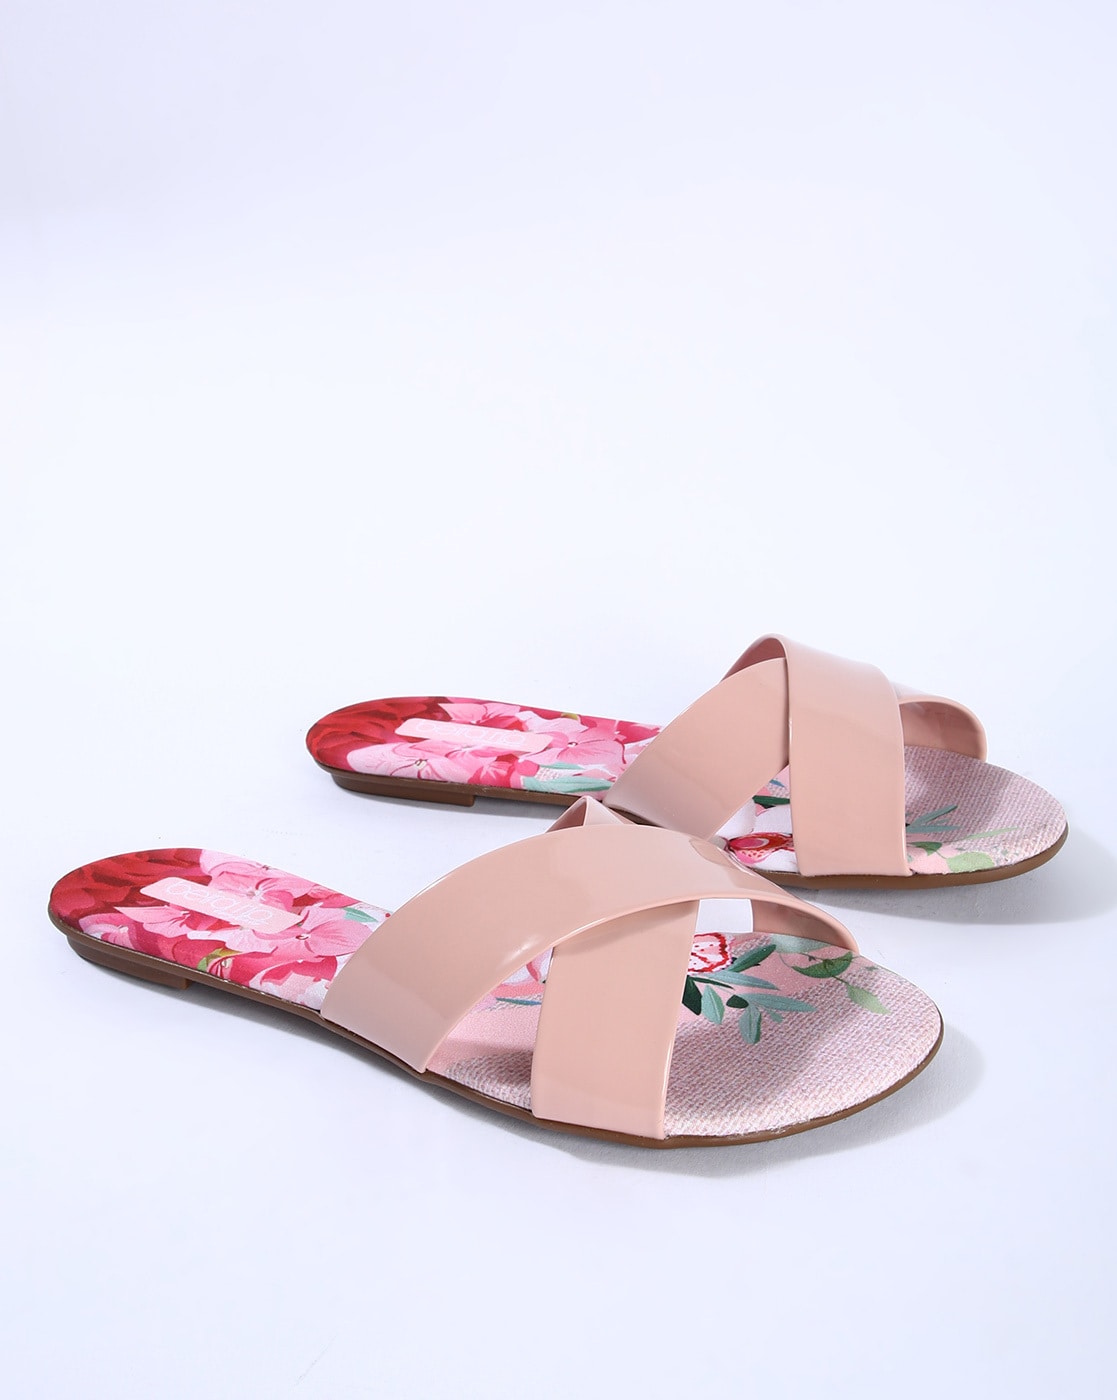 Buy Pink Flat Sandals for Women by 